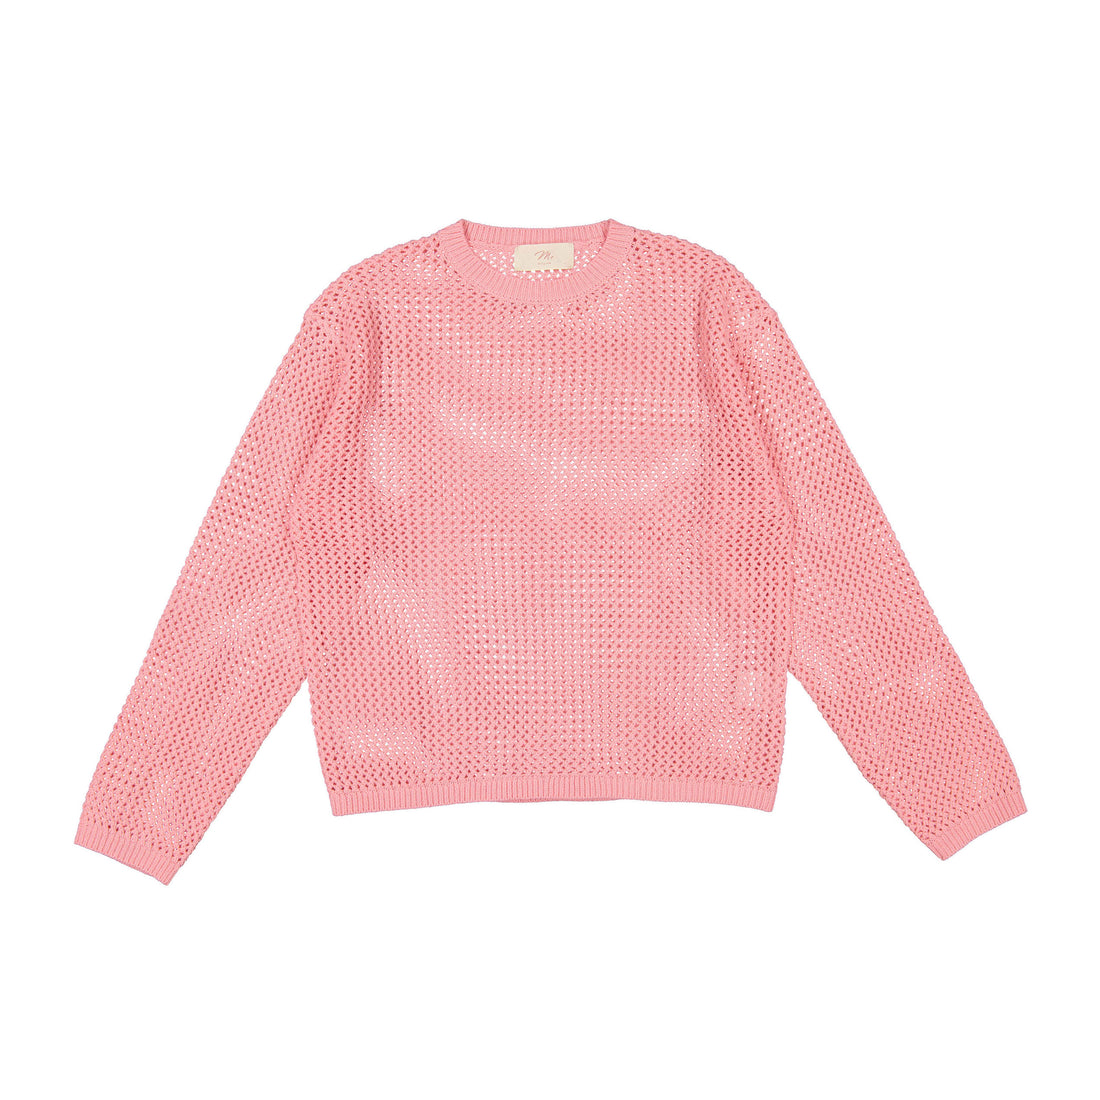 Maan Pink Knit Womens Simca Pullover